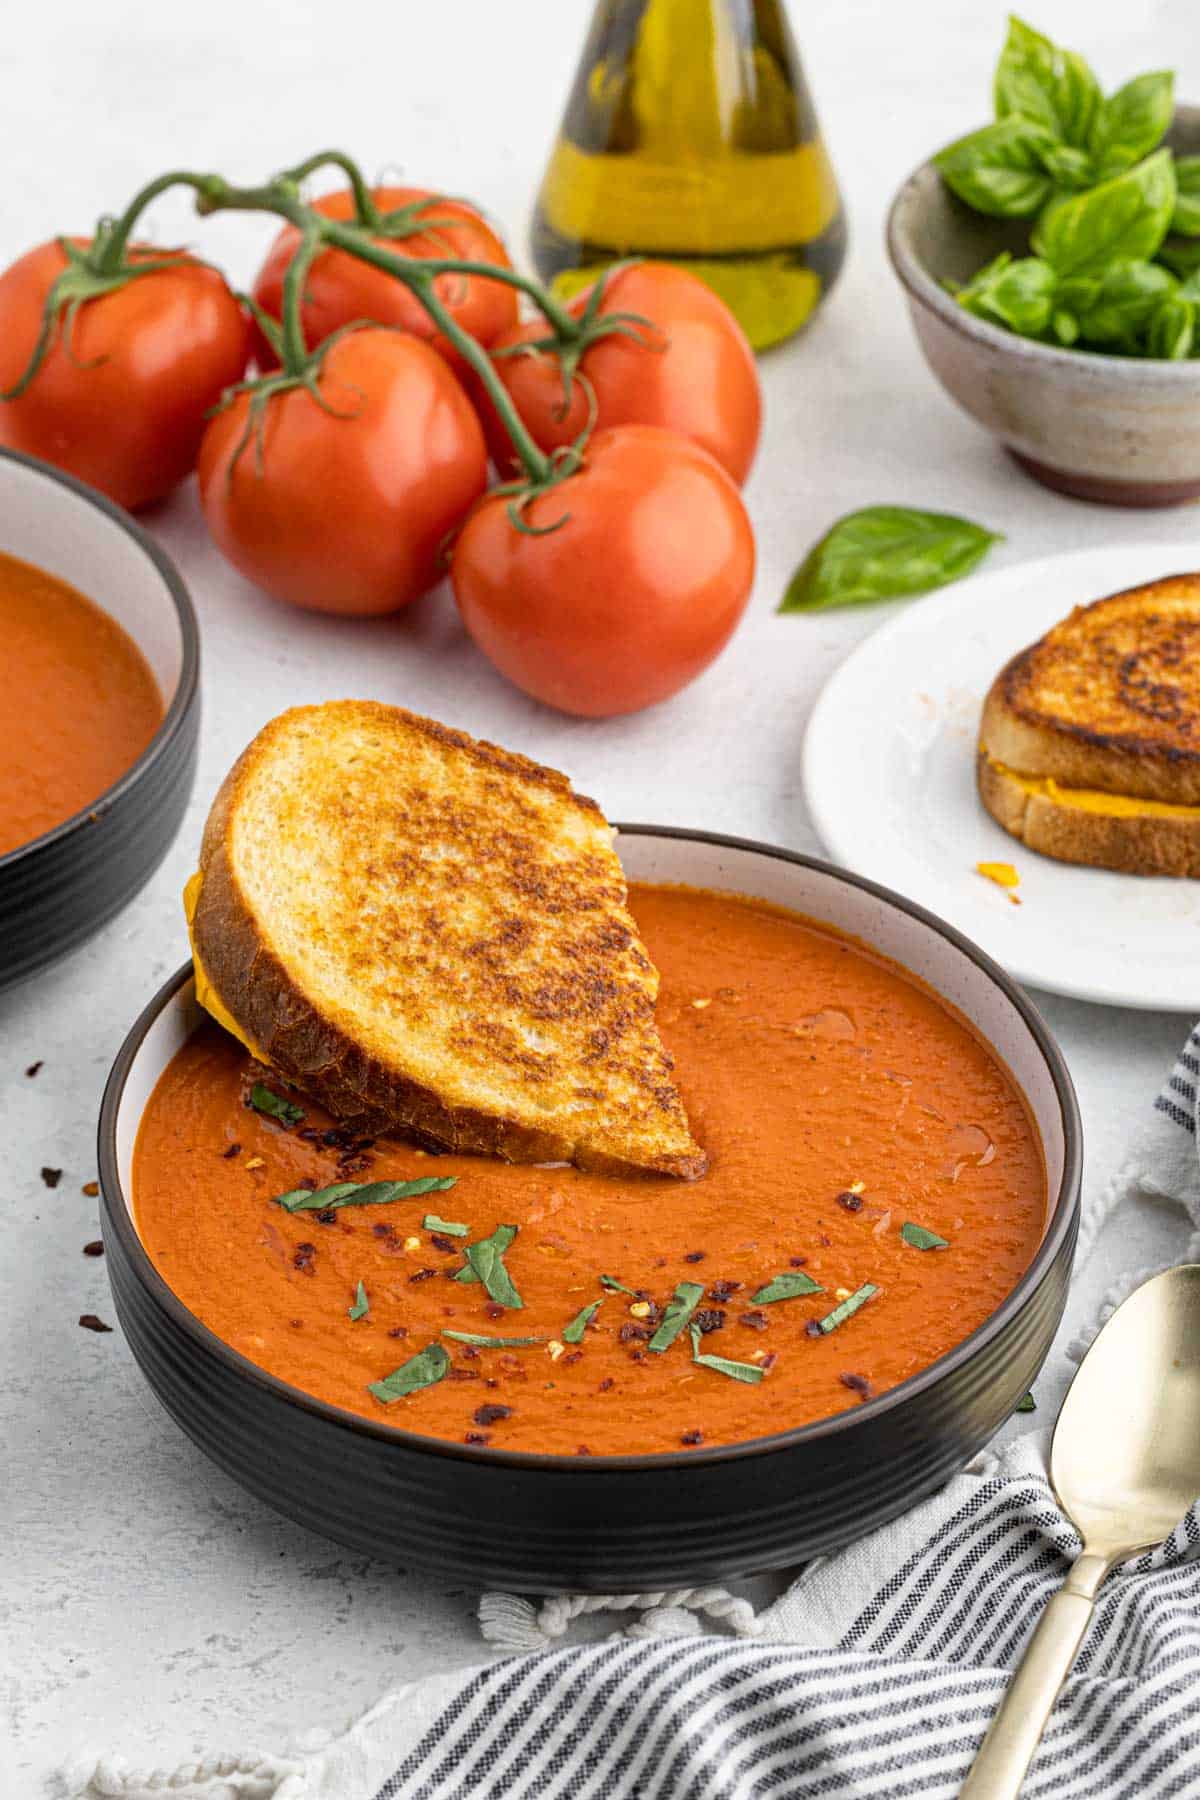 A bowl full of this simple tomato soup with a grilled cheese sandwich inside of it and fresh tomatoes, a spoon and another sandwich next to it